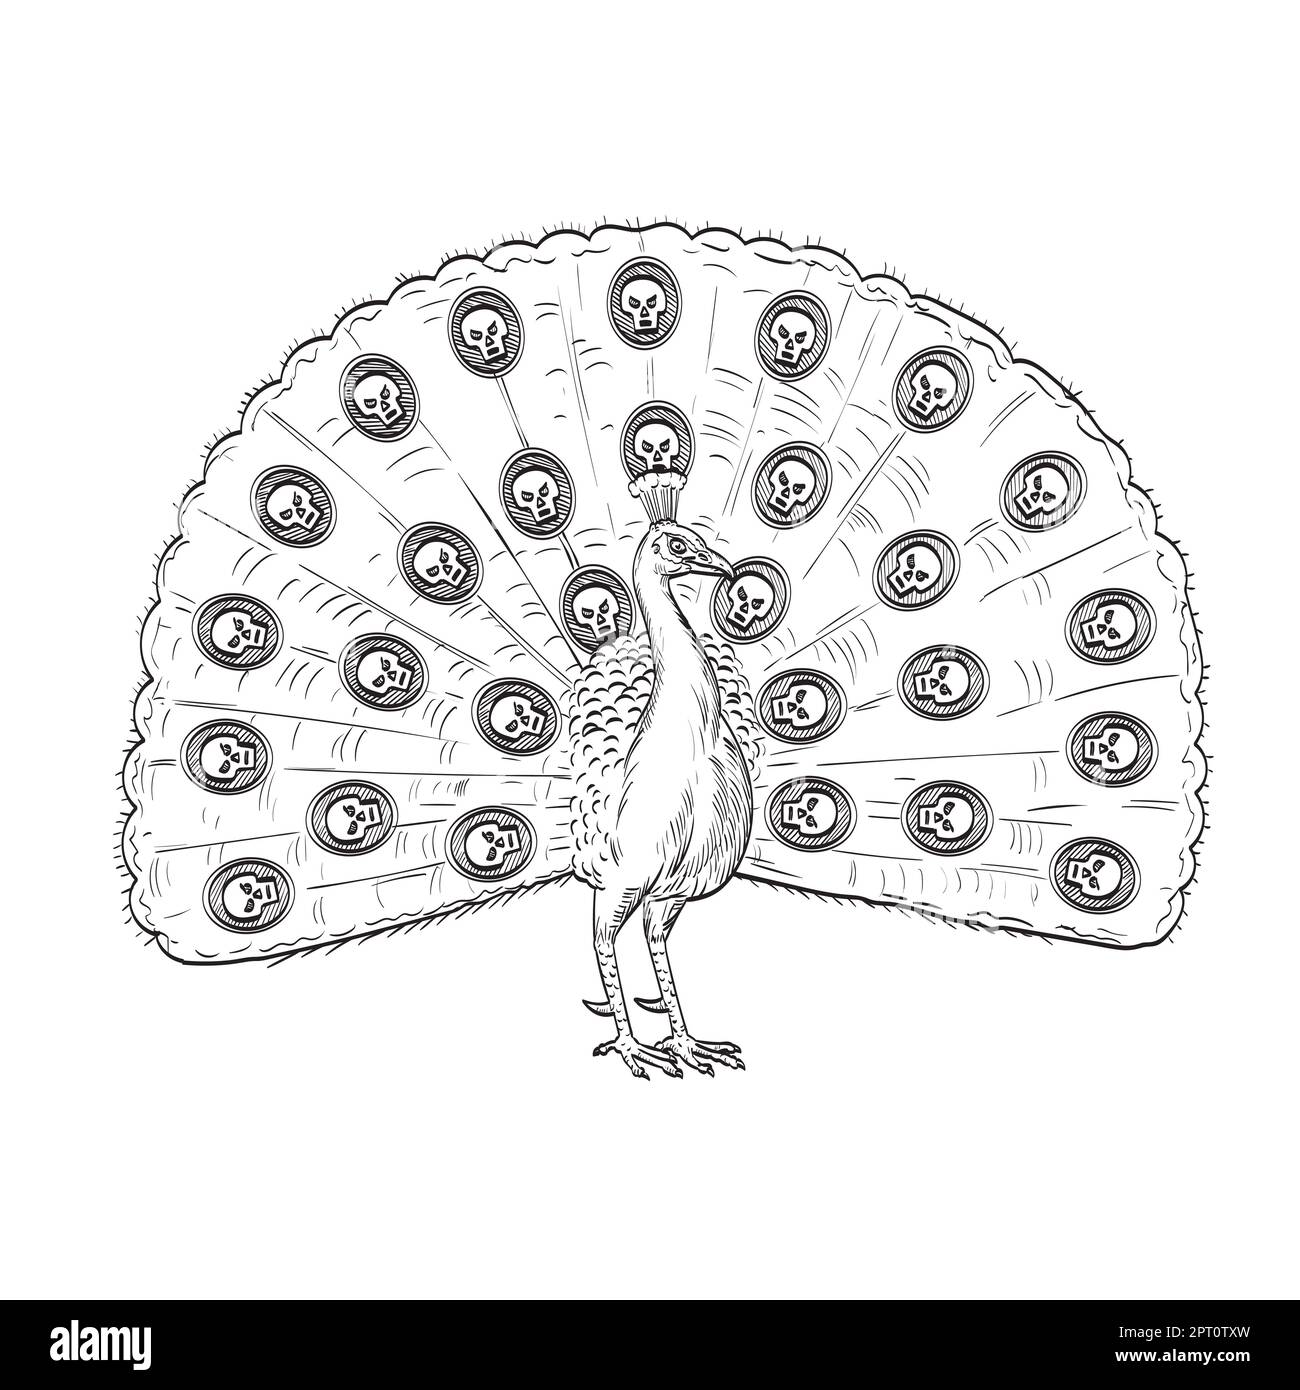 Comics style drawing or illustration of a peacock, Indian peafowl, common peafowl or blue peafowl with fan like tail of skull viewed from front on iso Stock Photo